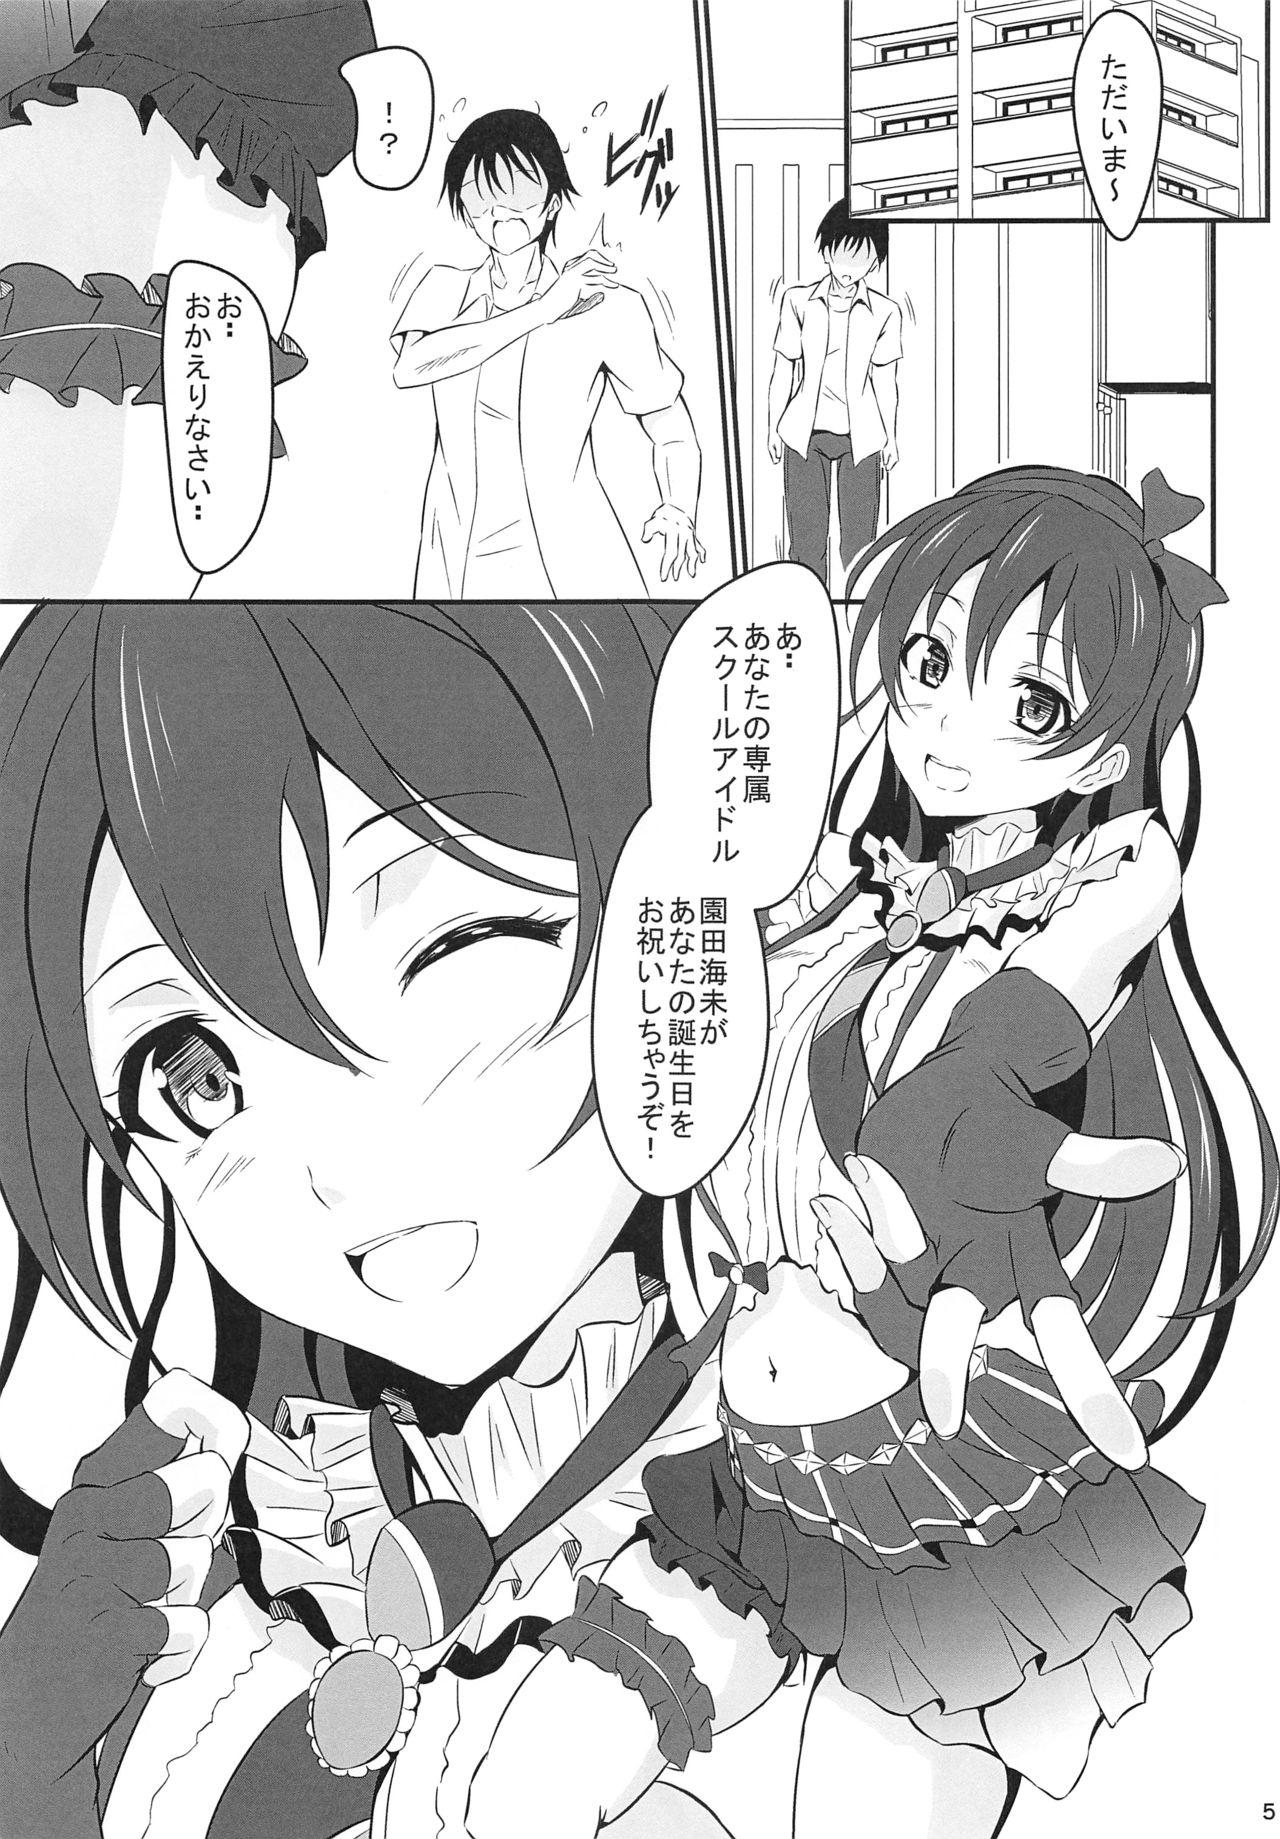 Perfect Body Umi LOVER - Love live Passion - Page 4